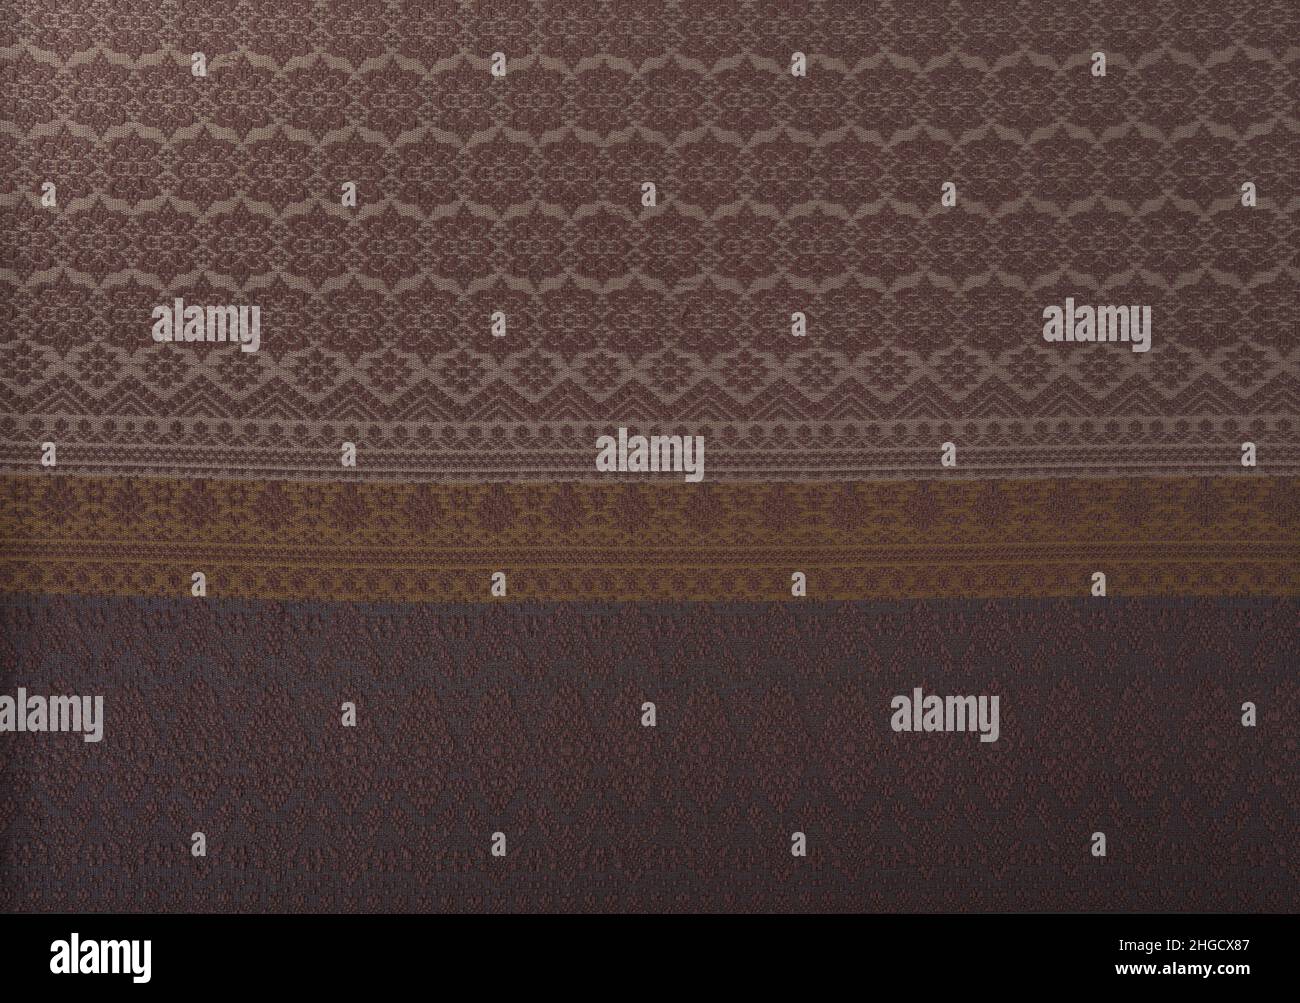 Close up of texture of Thai cotton knitted seamless pattern fabric. Top view for background. Stock Photo